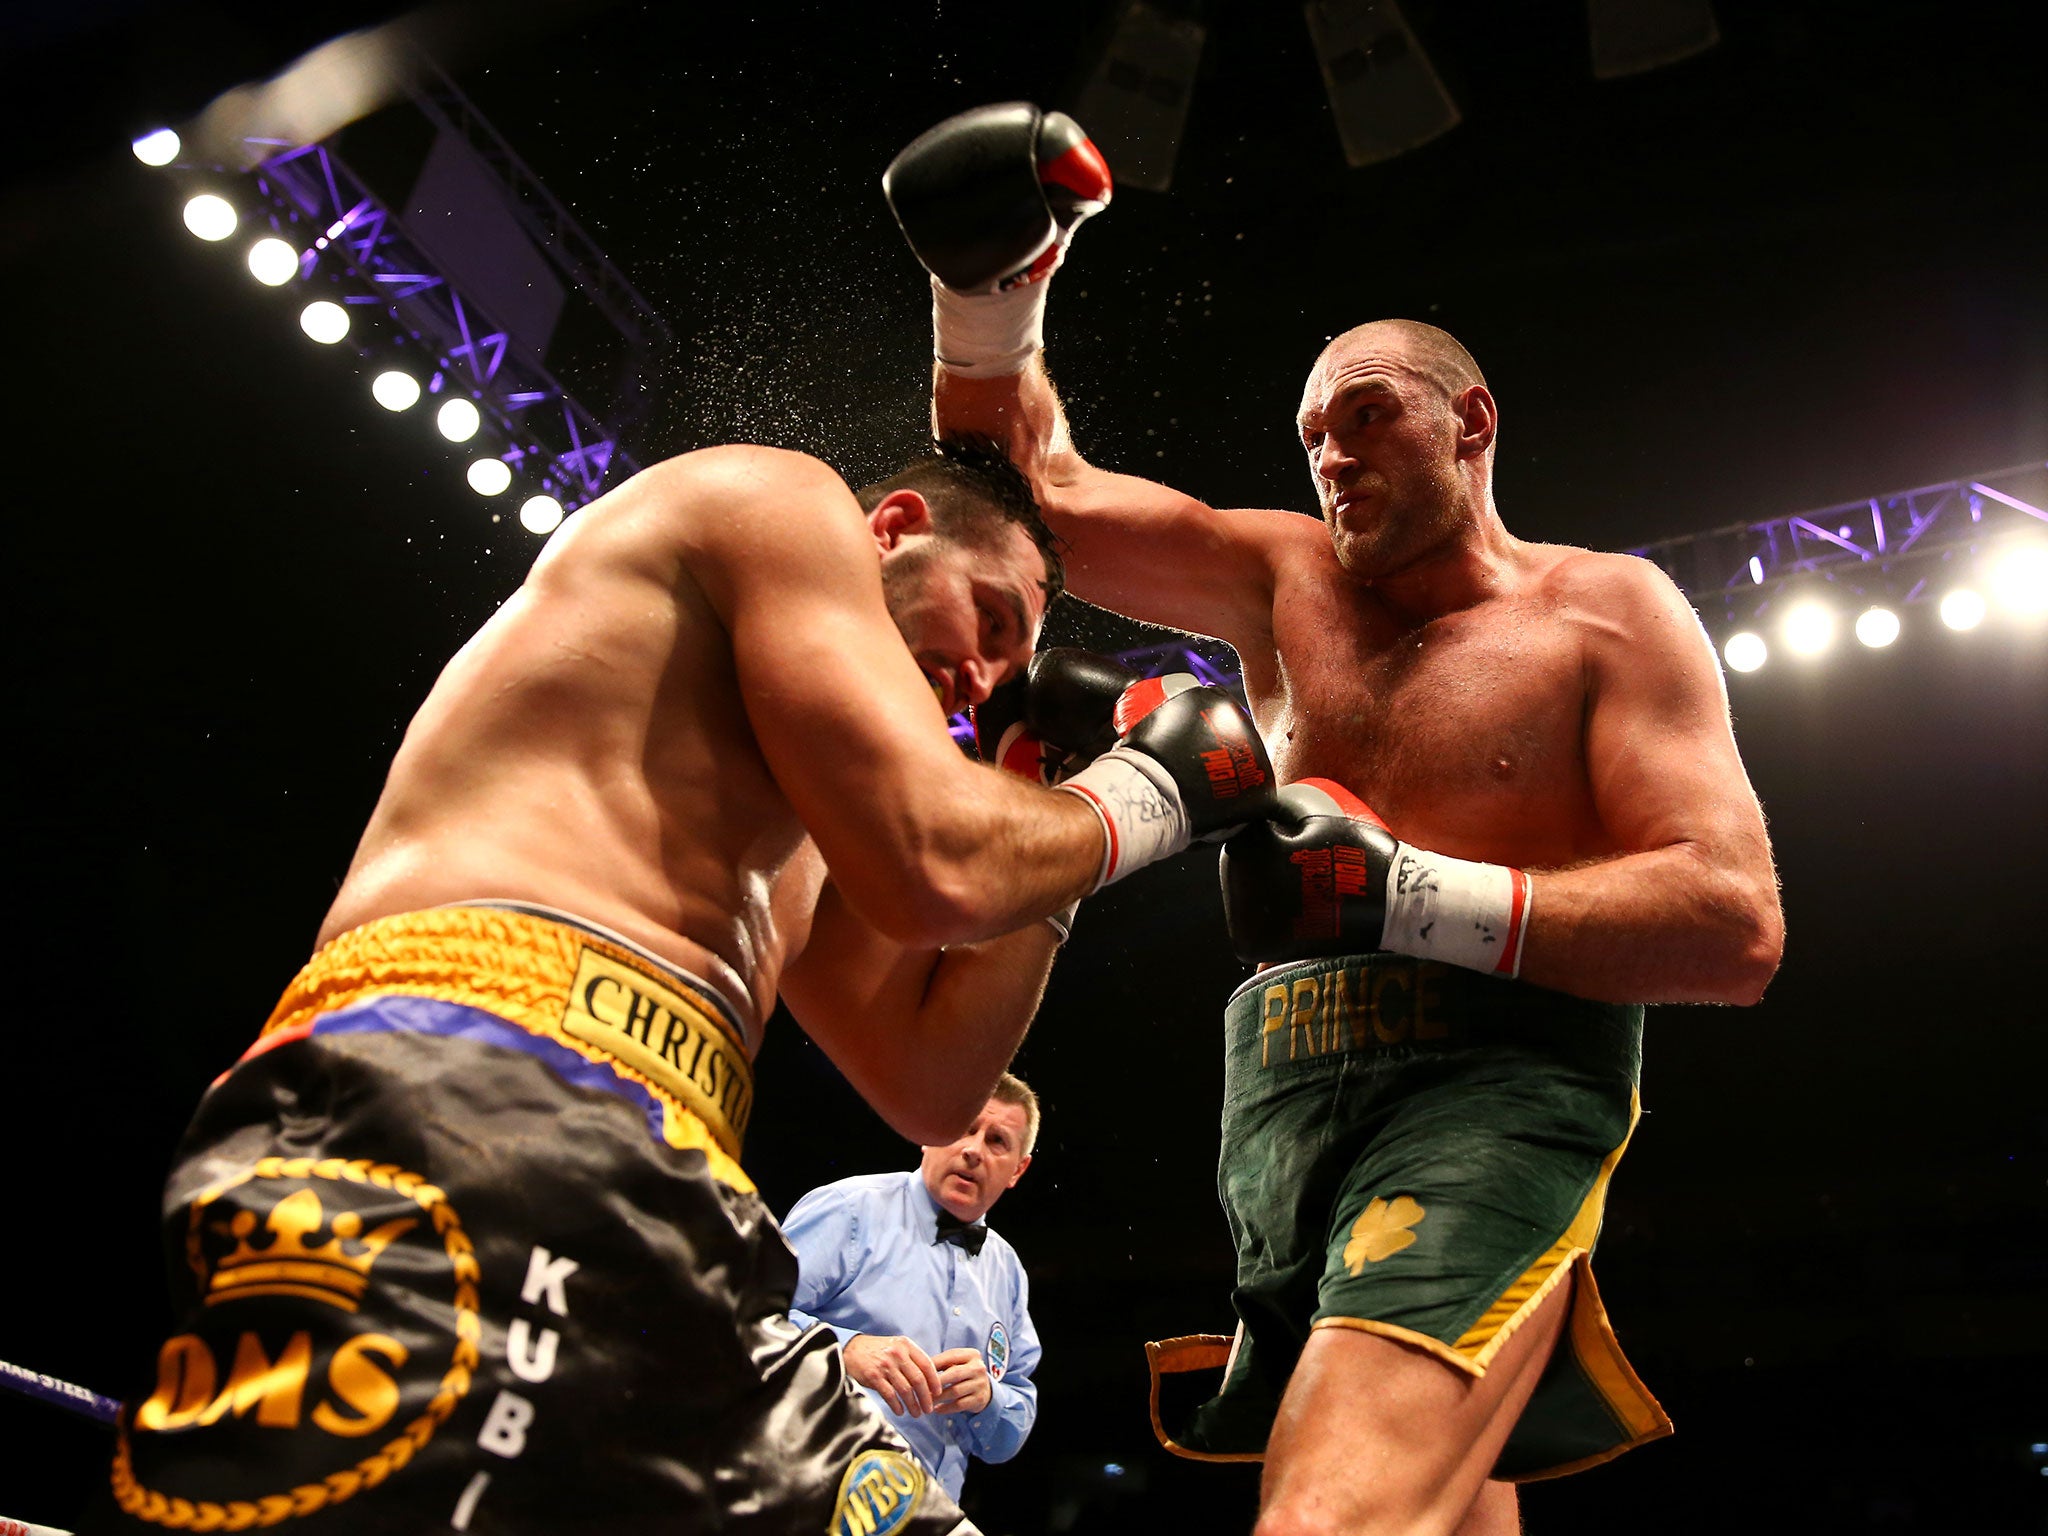 Tyson Fury is a potential contender but Haye has already messed him around twice